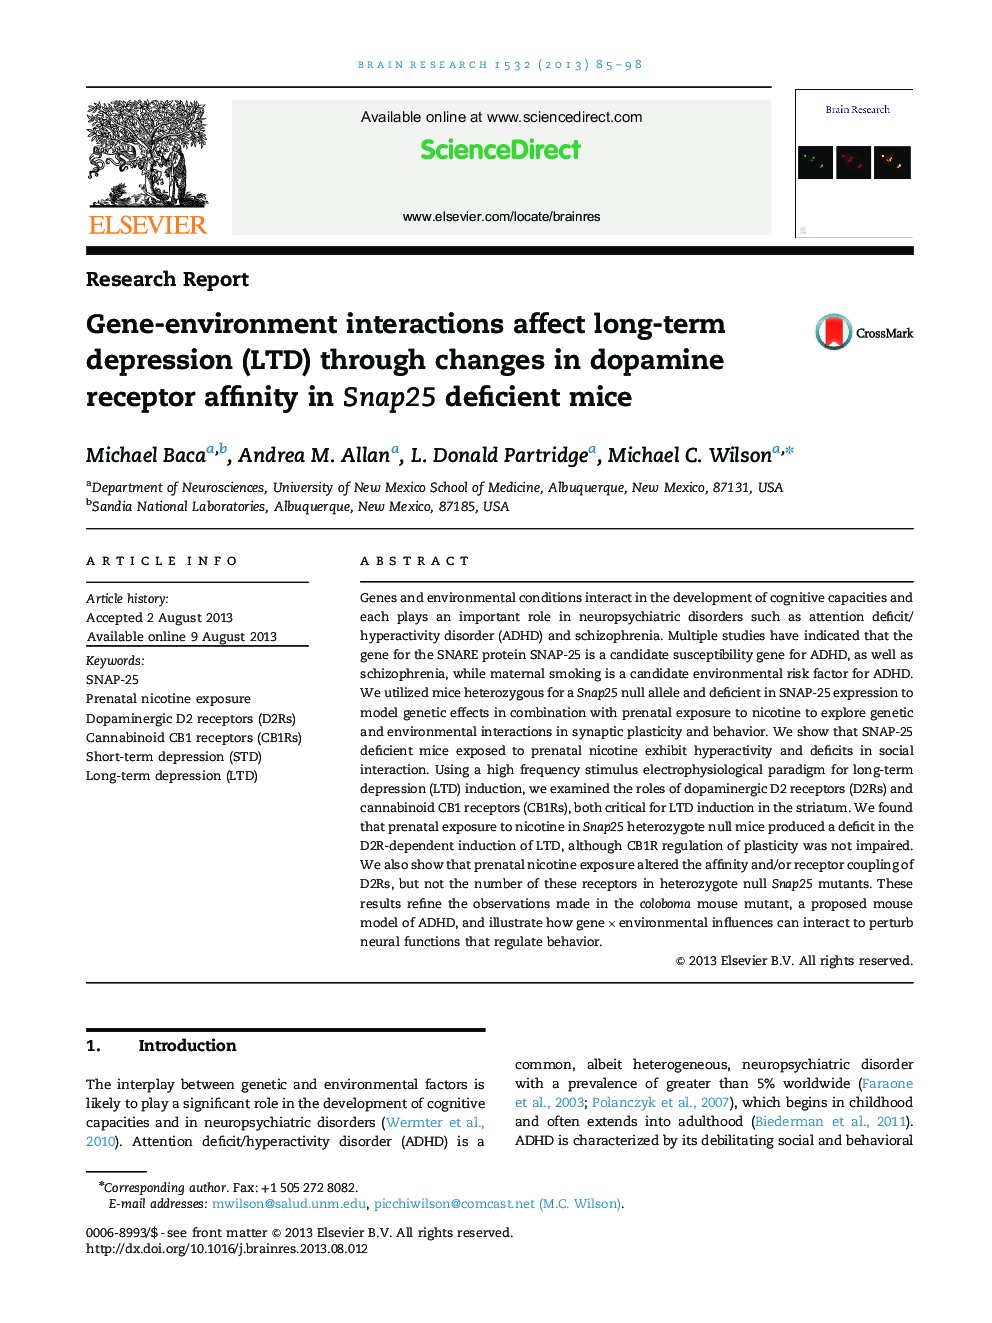 Research ReportGene-environment interactions affect long-term depression (LTD) through changes in dopamine receptor affinity in Snap25 deficient mice